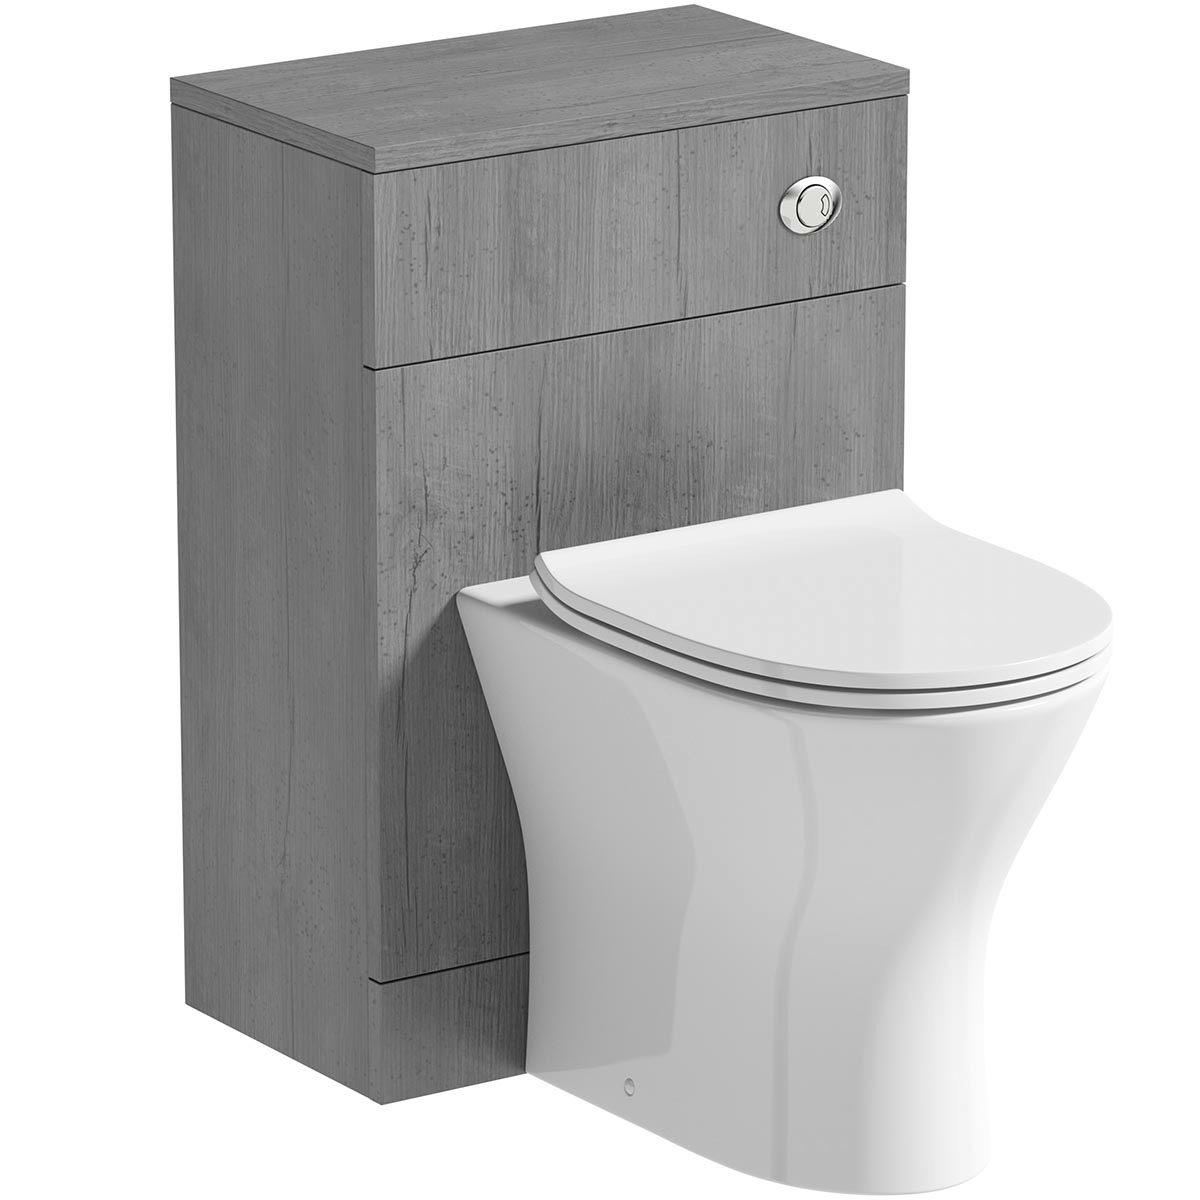 Orchard Lea concrete slimline back to wall unit 500mm and Derwent round back to wall toilet with seat